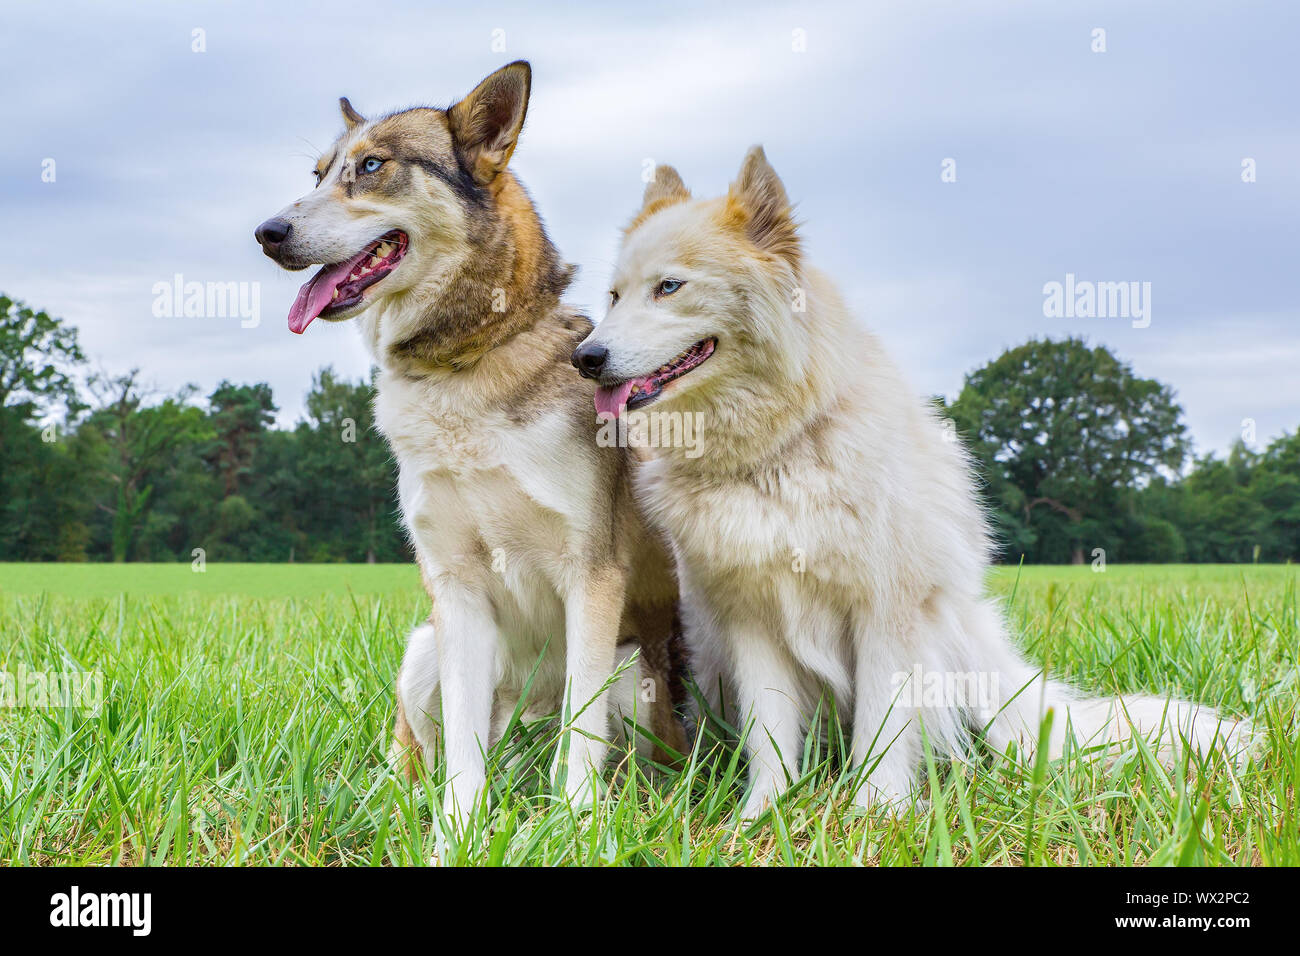 Two huskies sit together in meadow outside Stock Photo